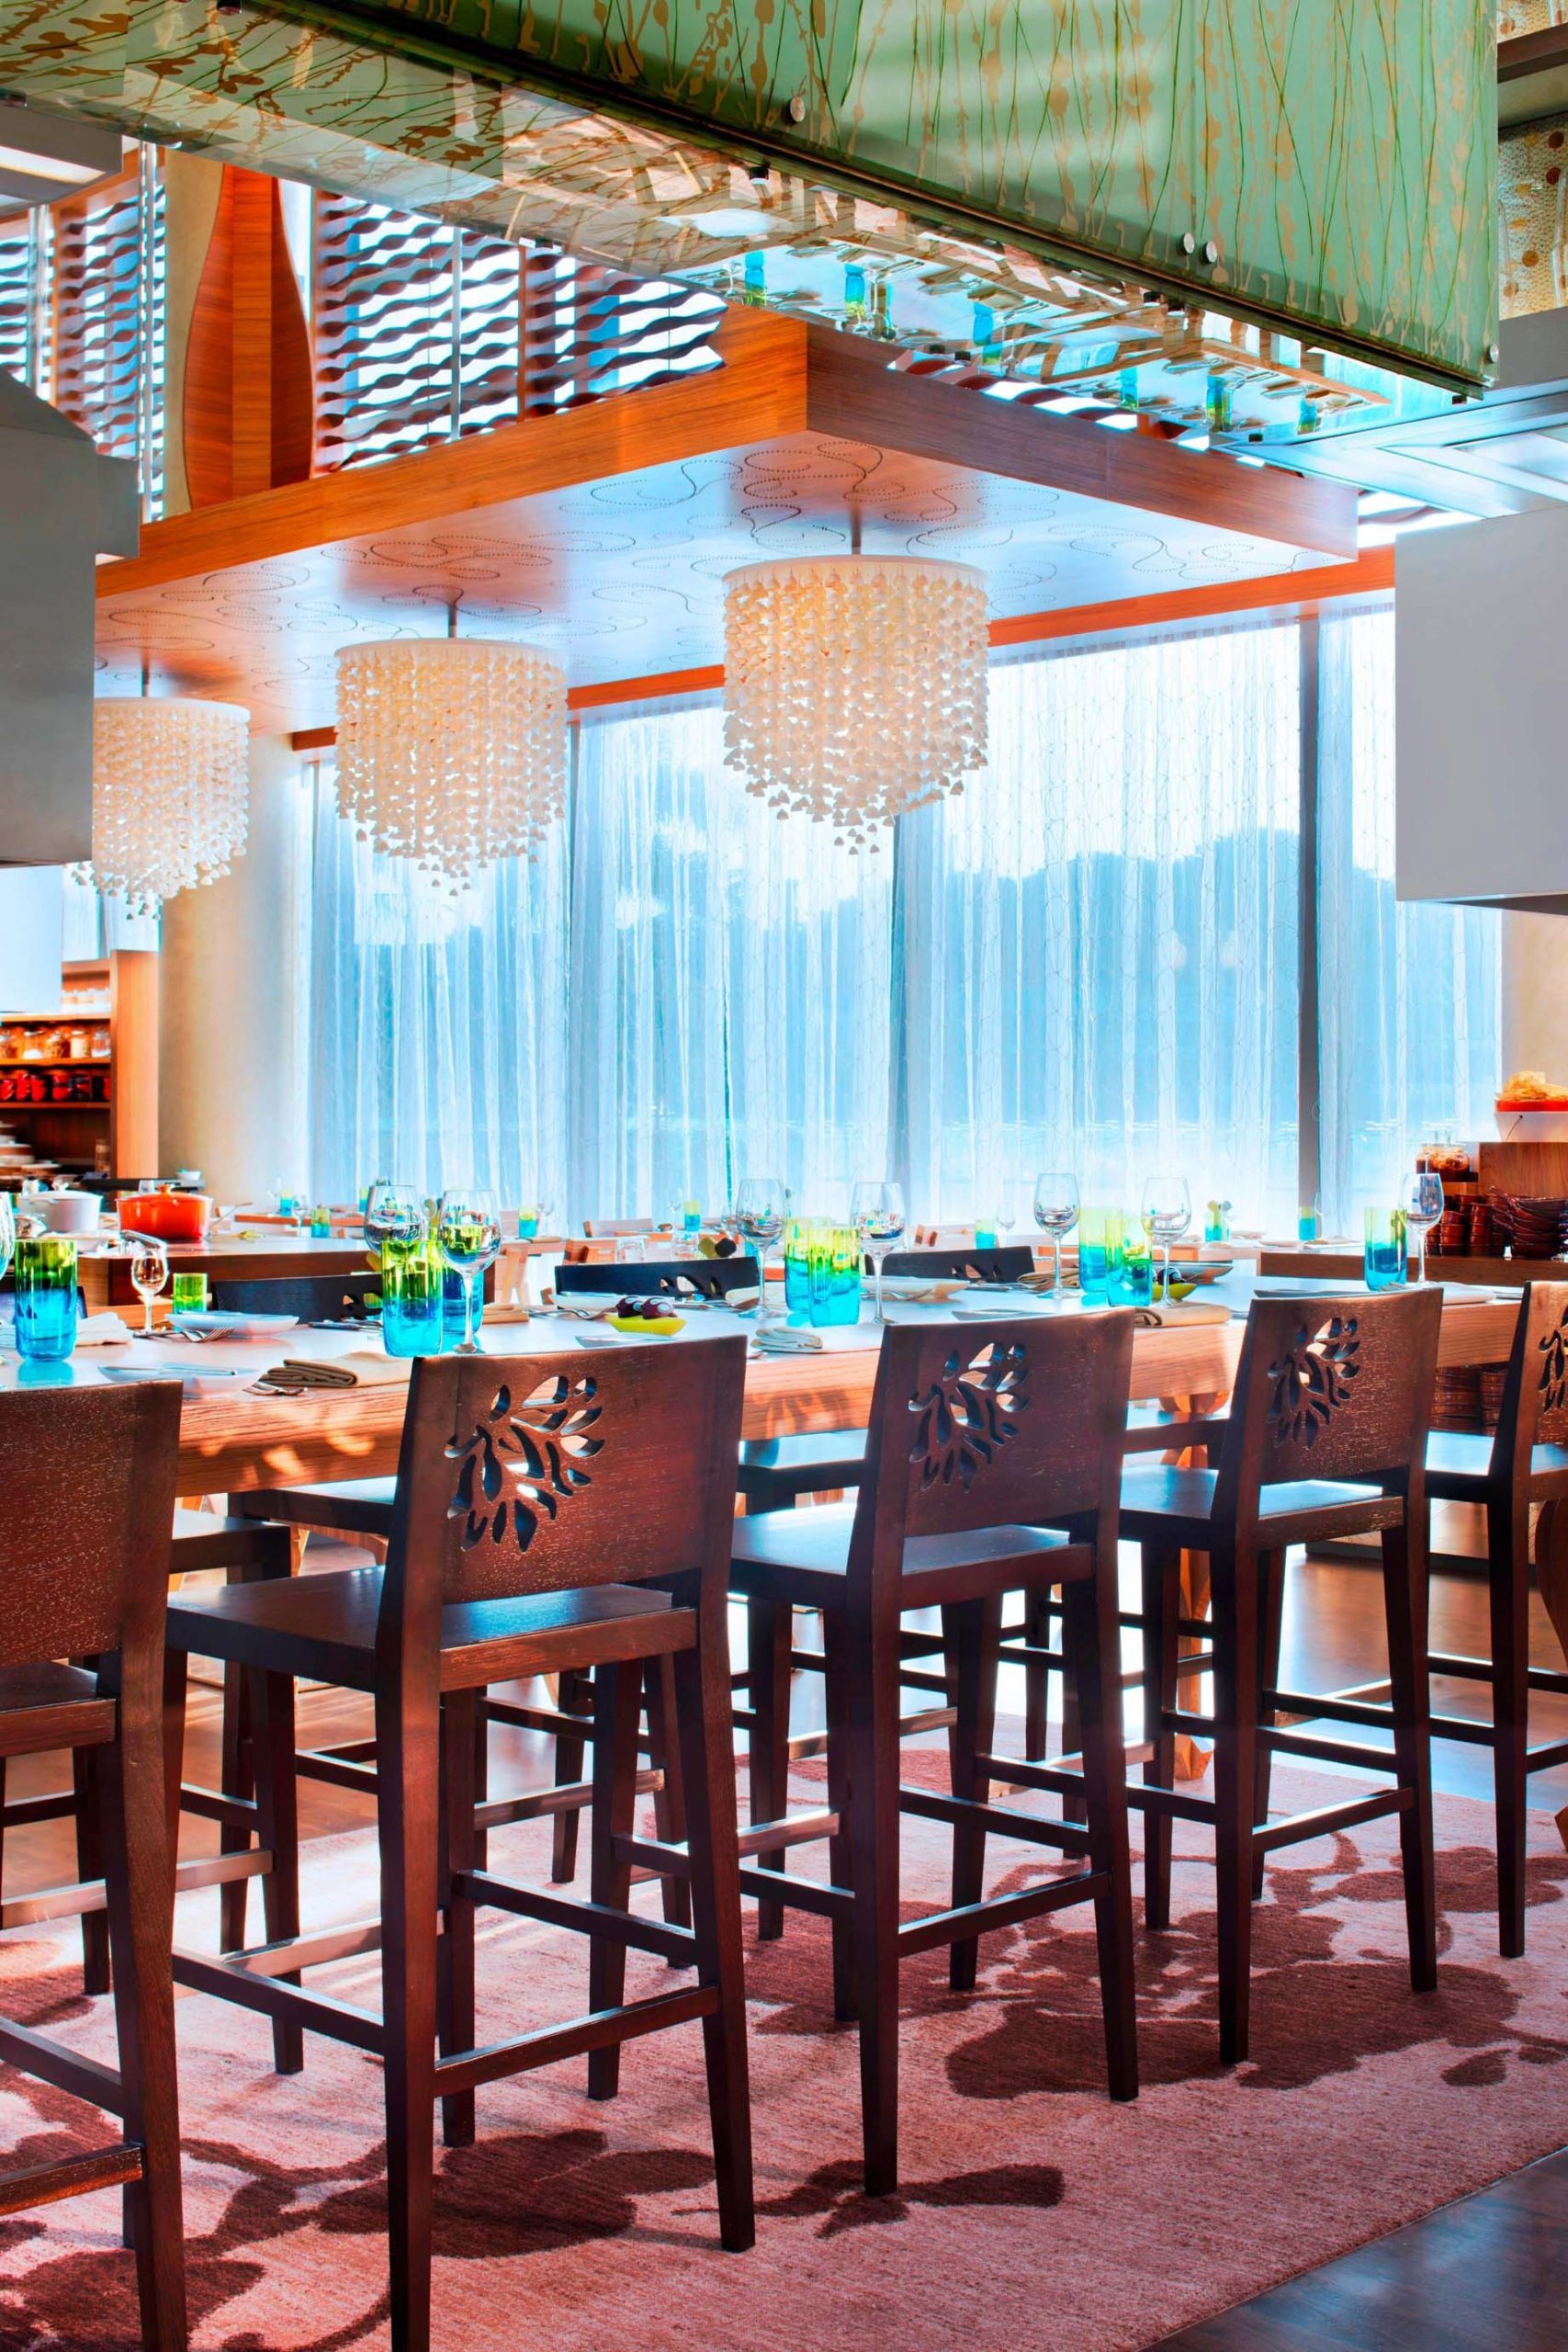 W Singapore Sentosa Cove Hotel – Singapore – The Kitchen Table Restaurant Chefs Table Seating